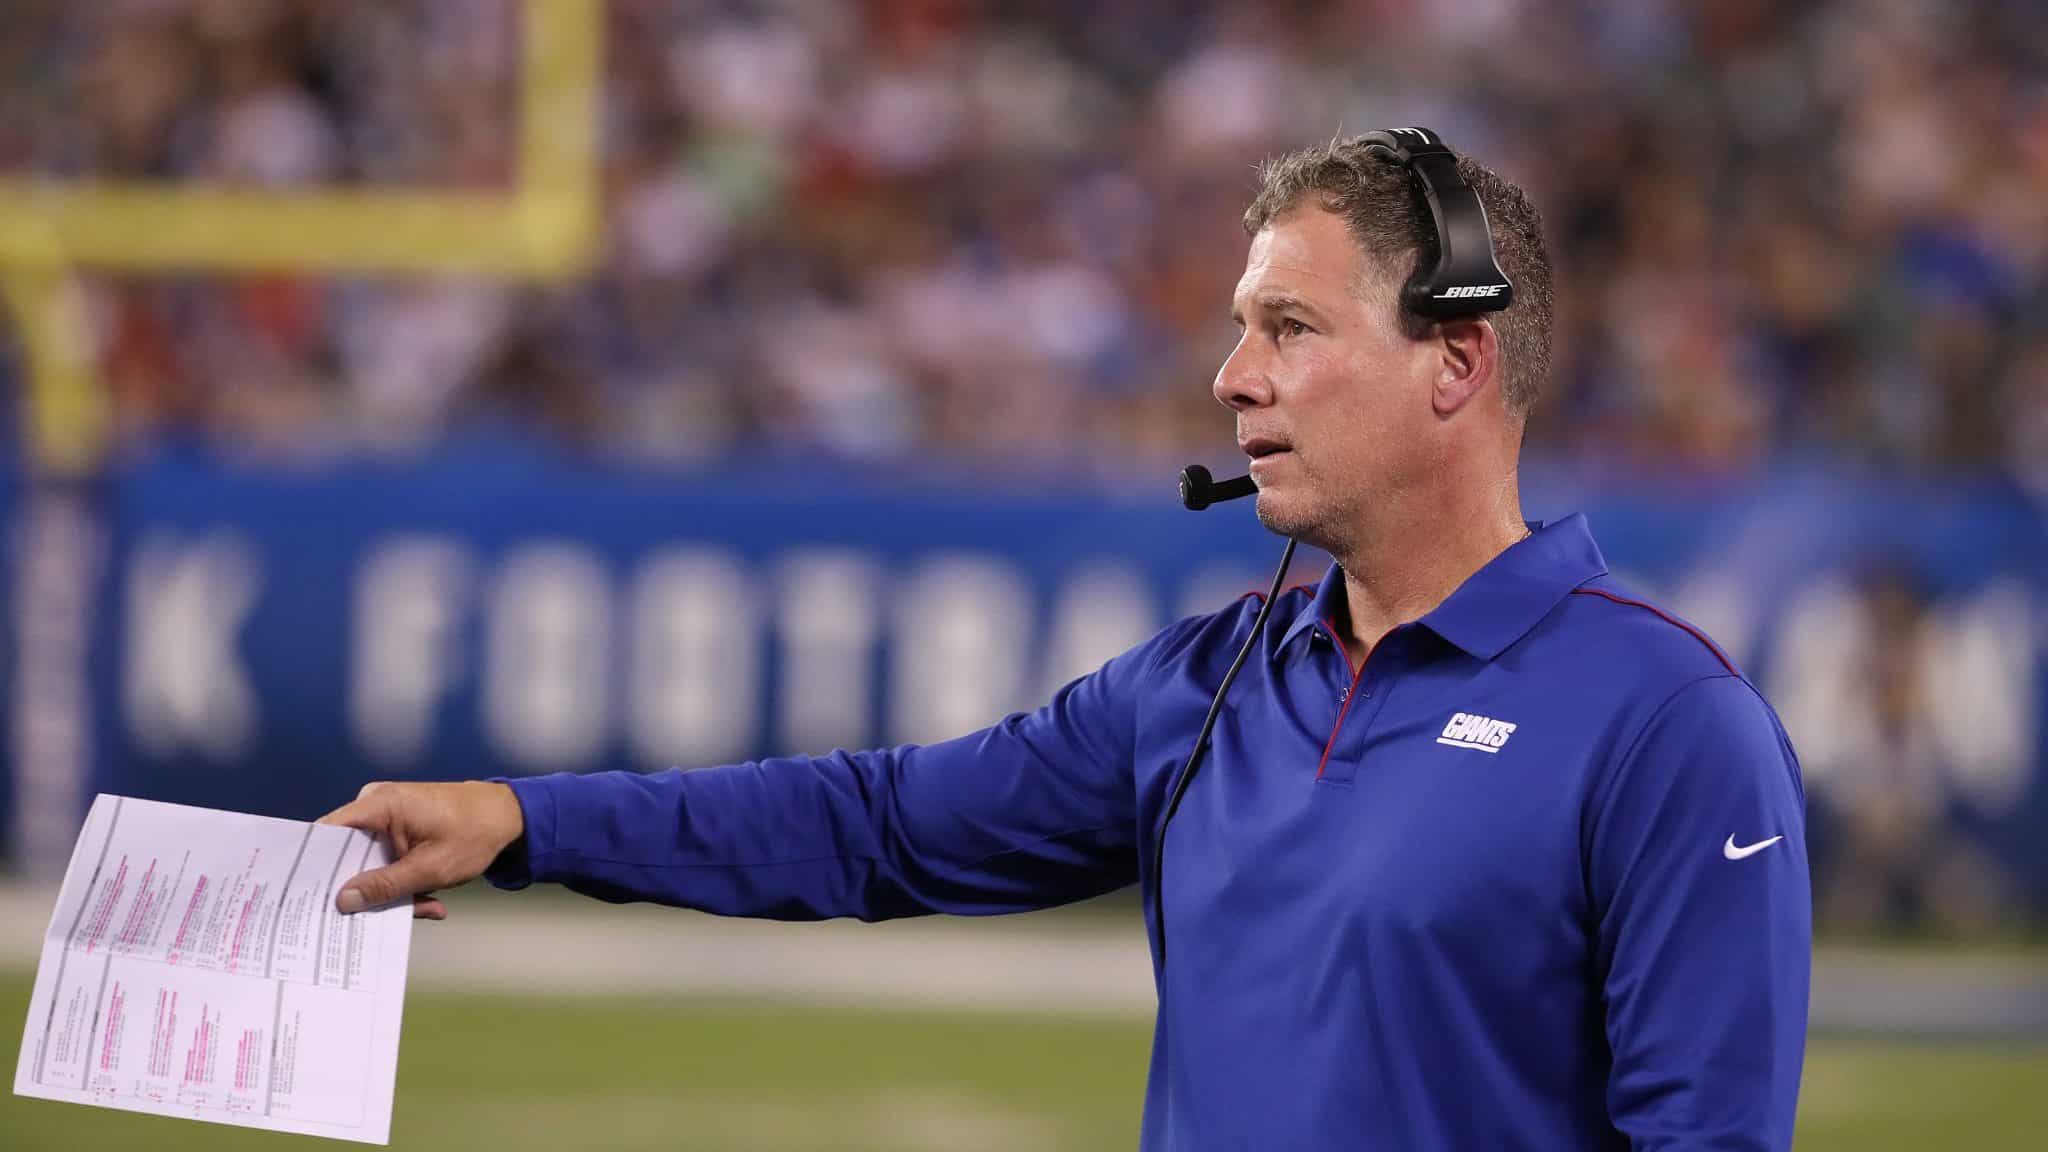 EAST RUTHERFORD, NEW JERSEY - AUGUST 08: Head coach Pat Shurmur of the New York Giants looks on against the New York Jets during their Pre Season game at MetLife Stadium on August 08, 2019 in East Rutherford, New Jersey.